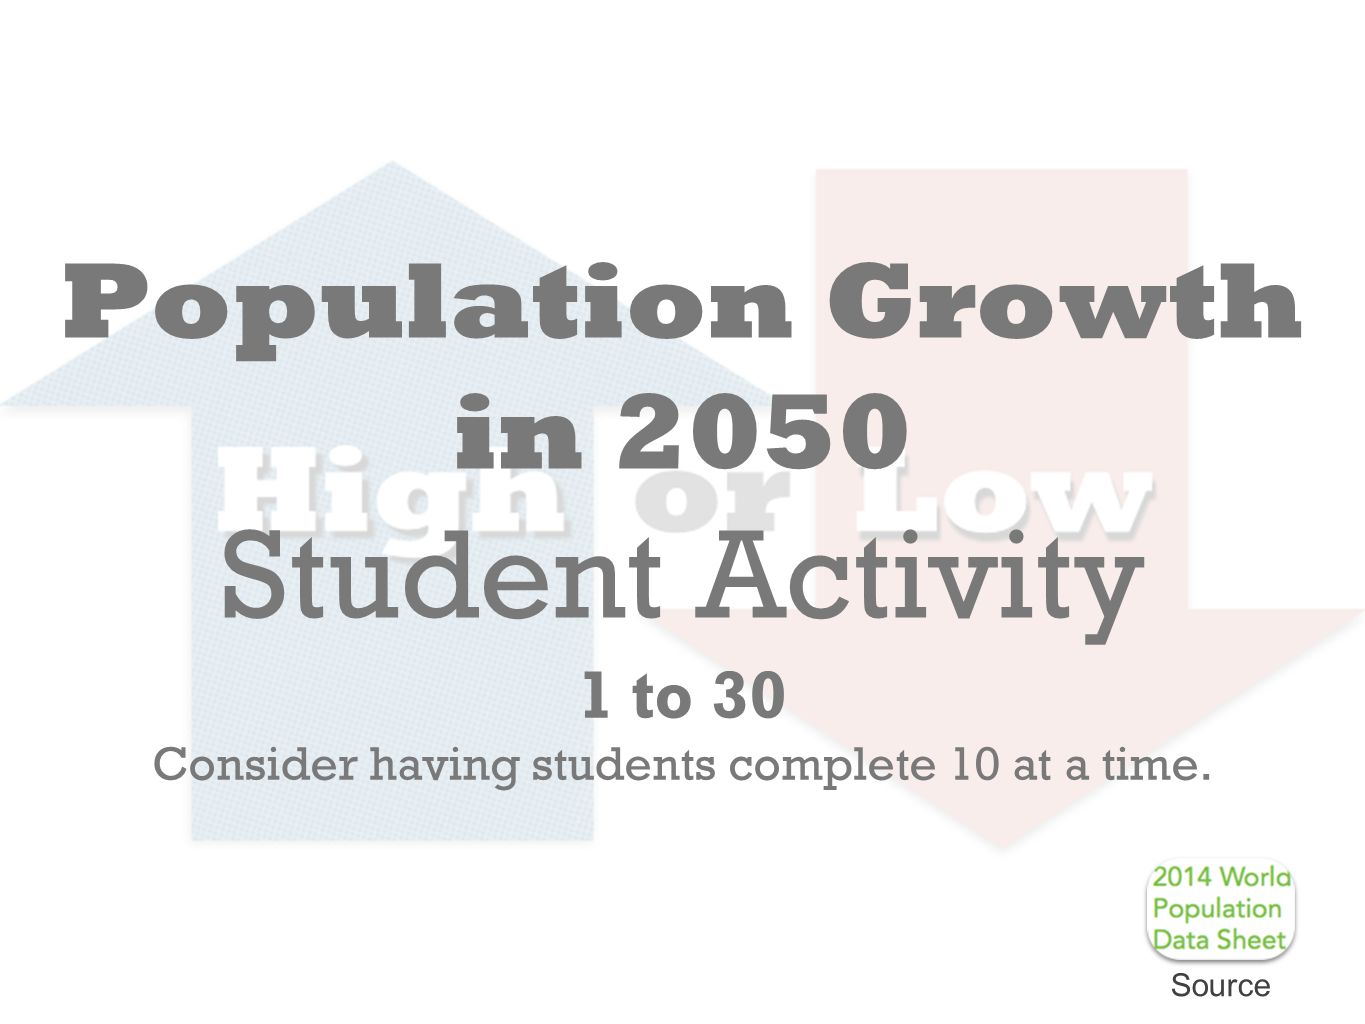 Population Growth in 2050 Student Activity 1 to 30 Consider having students complete 10 at a time.